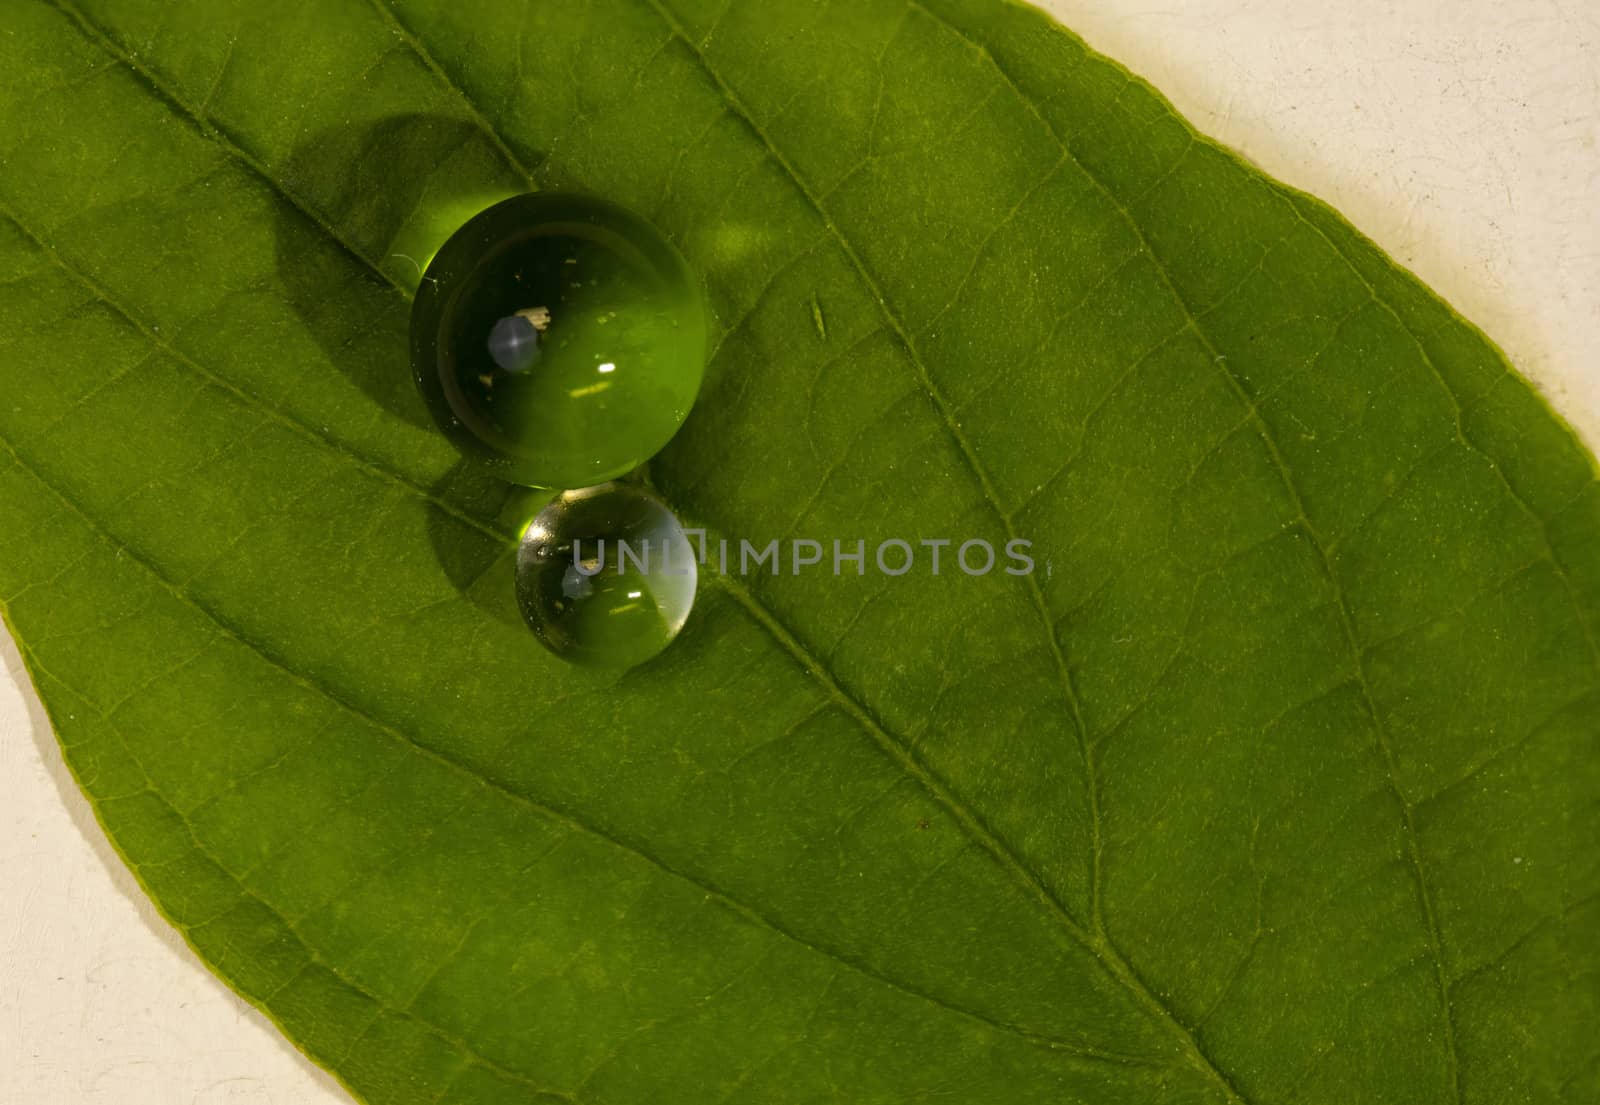 Macro photo of two water beads resting on the top of a dogwood leaf.